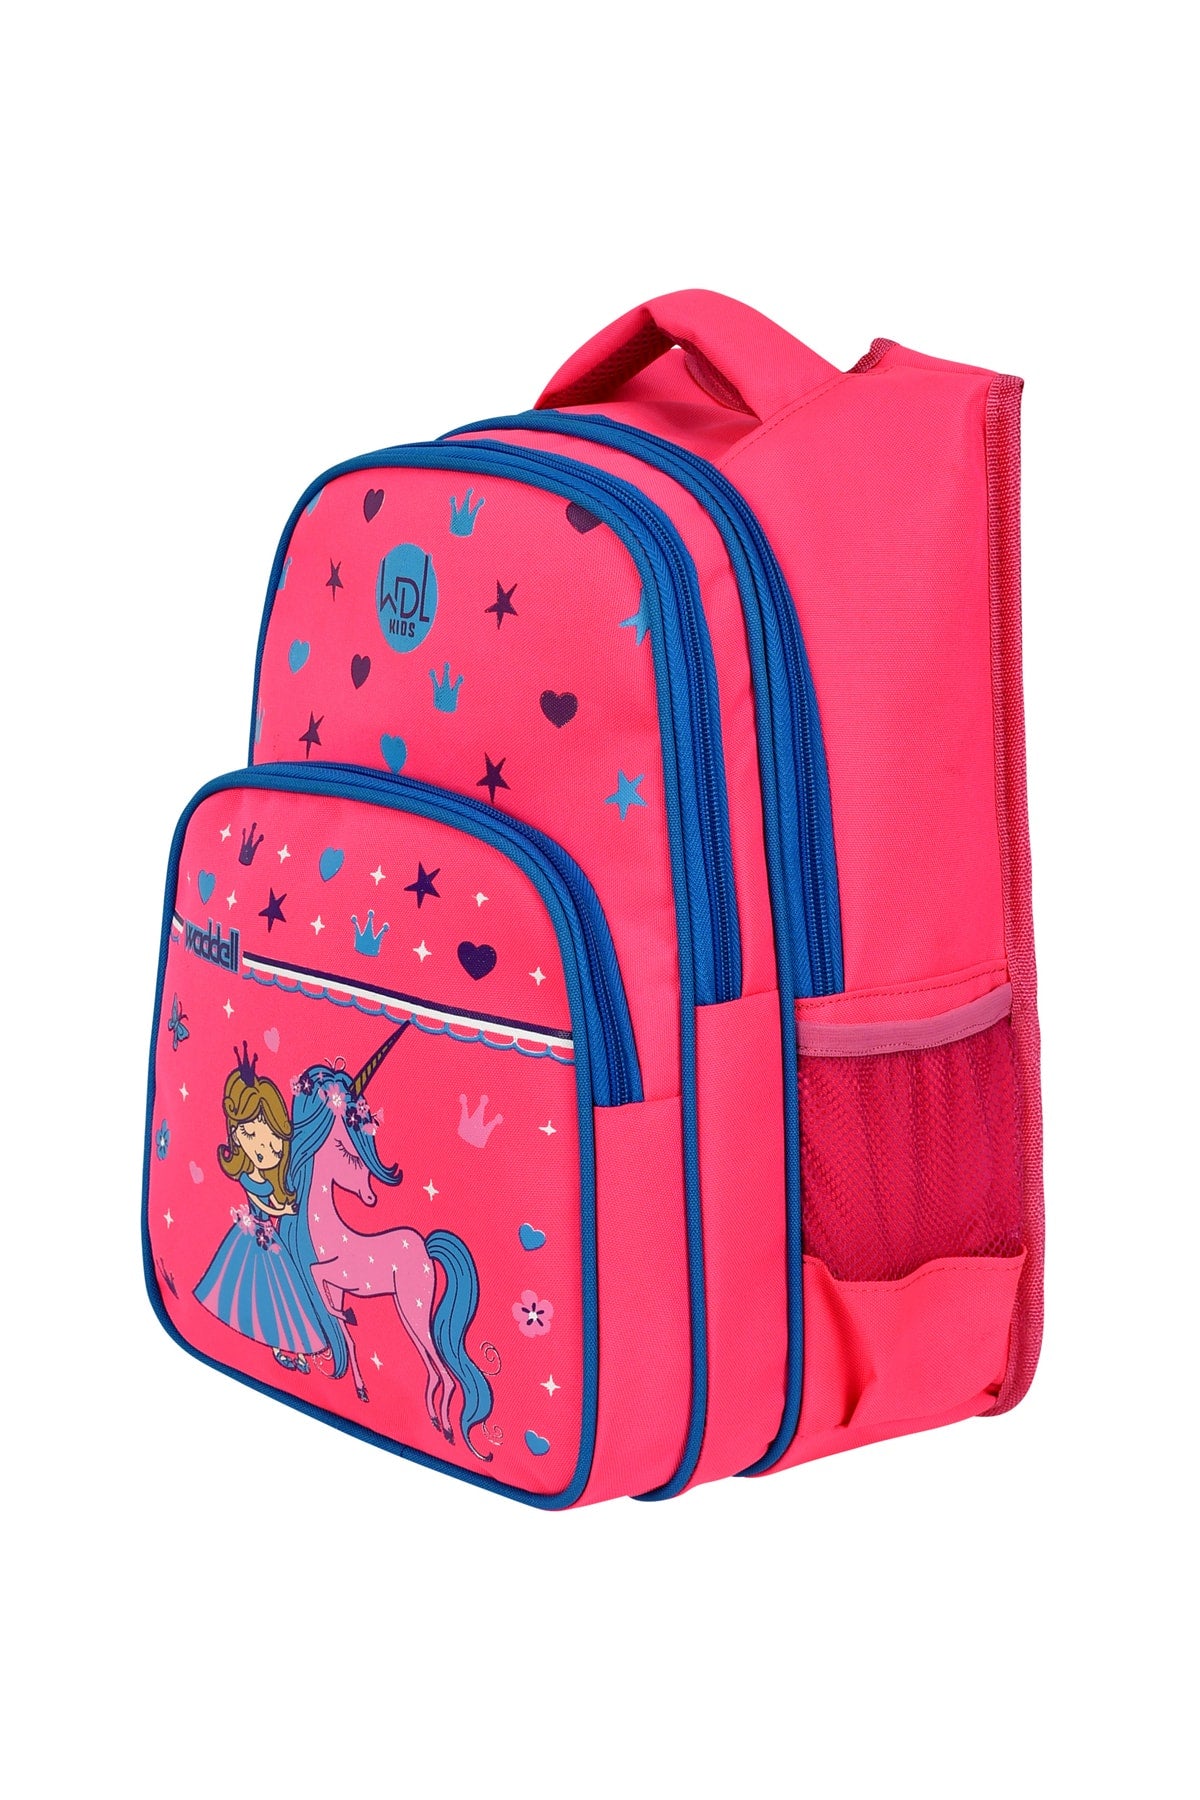 Licensed Pink Princess Pattern Primary School Backpack And Lunch Box